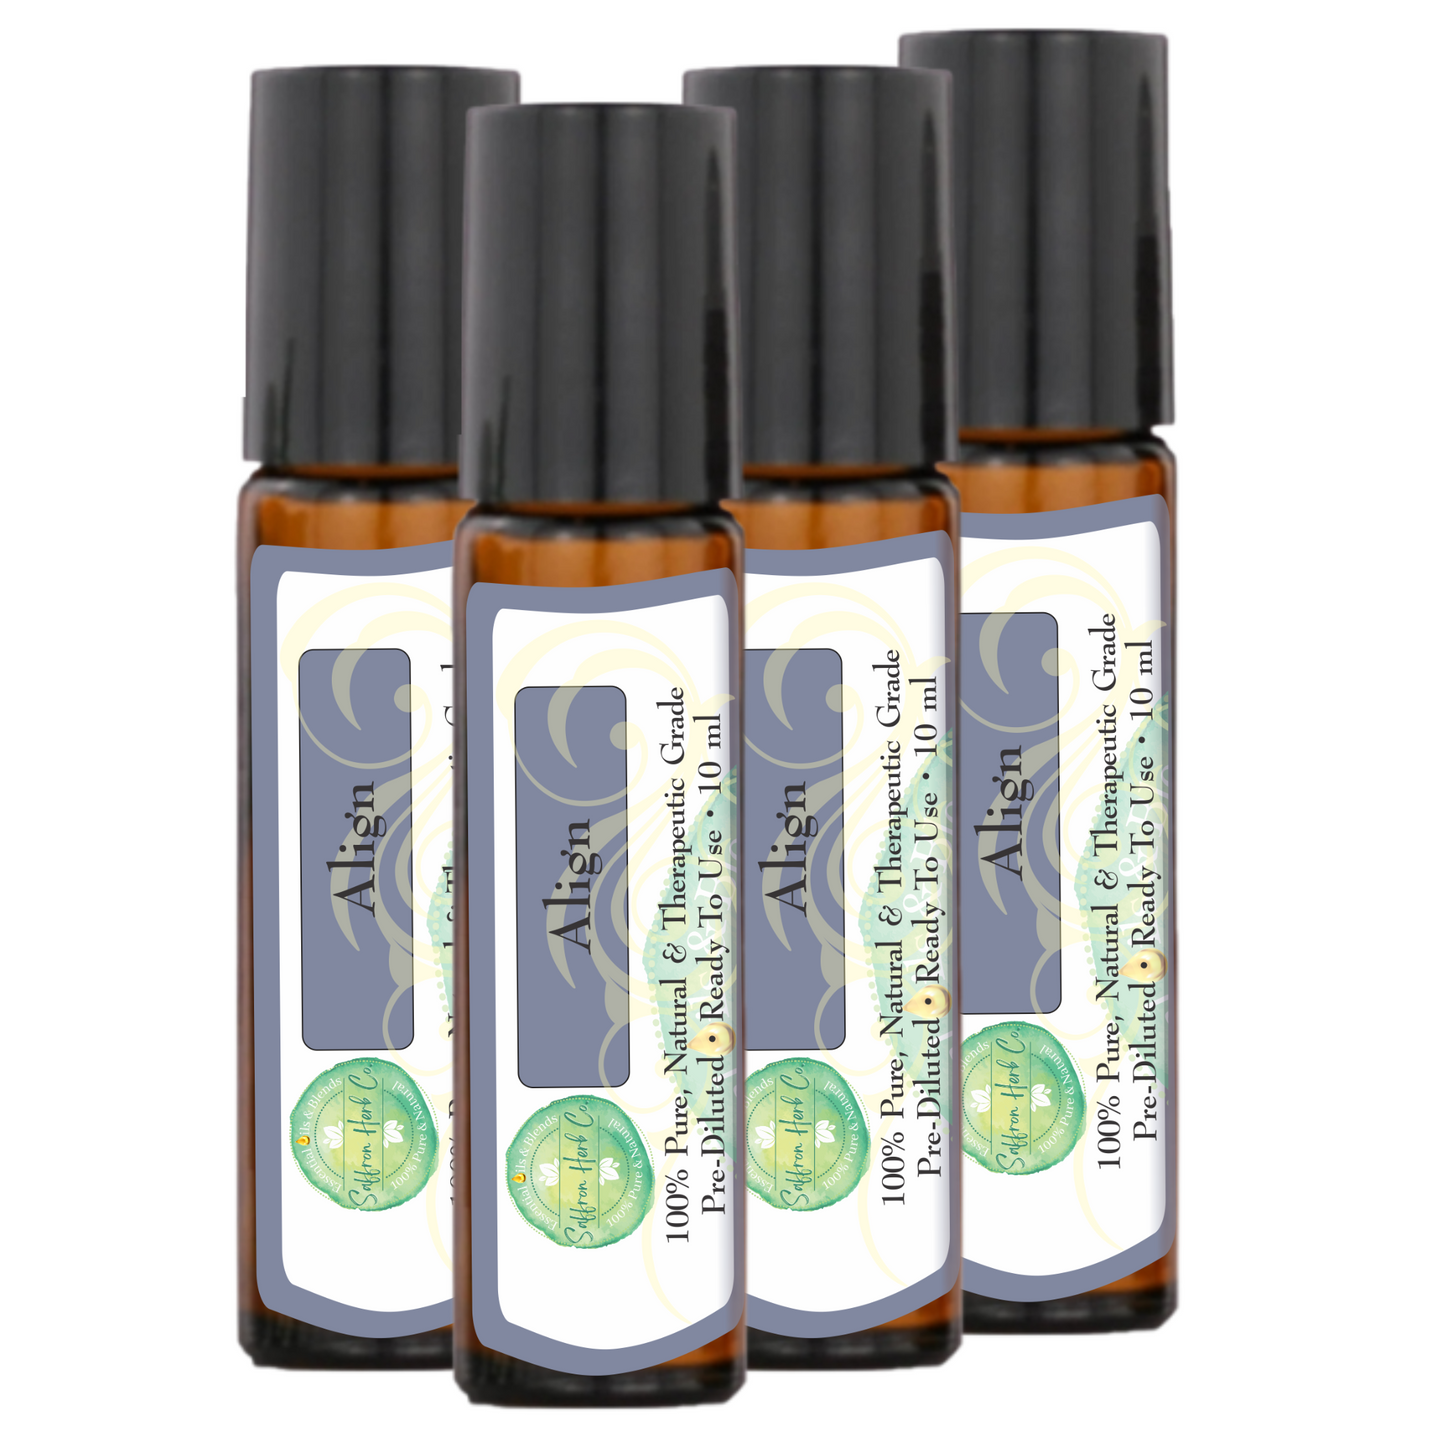 Align™ Essential Oil Roller Bottle Blend • 100% Pure & Natural • Pre-Diluted • Ready To Use